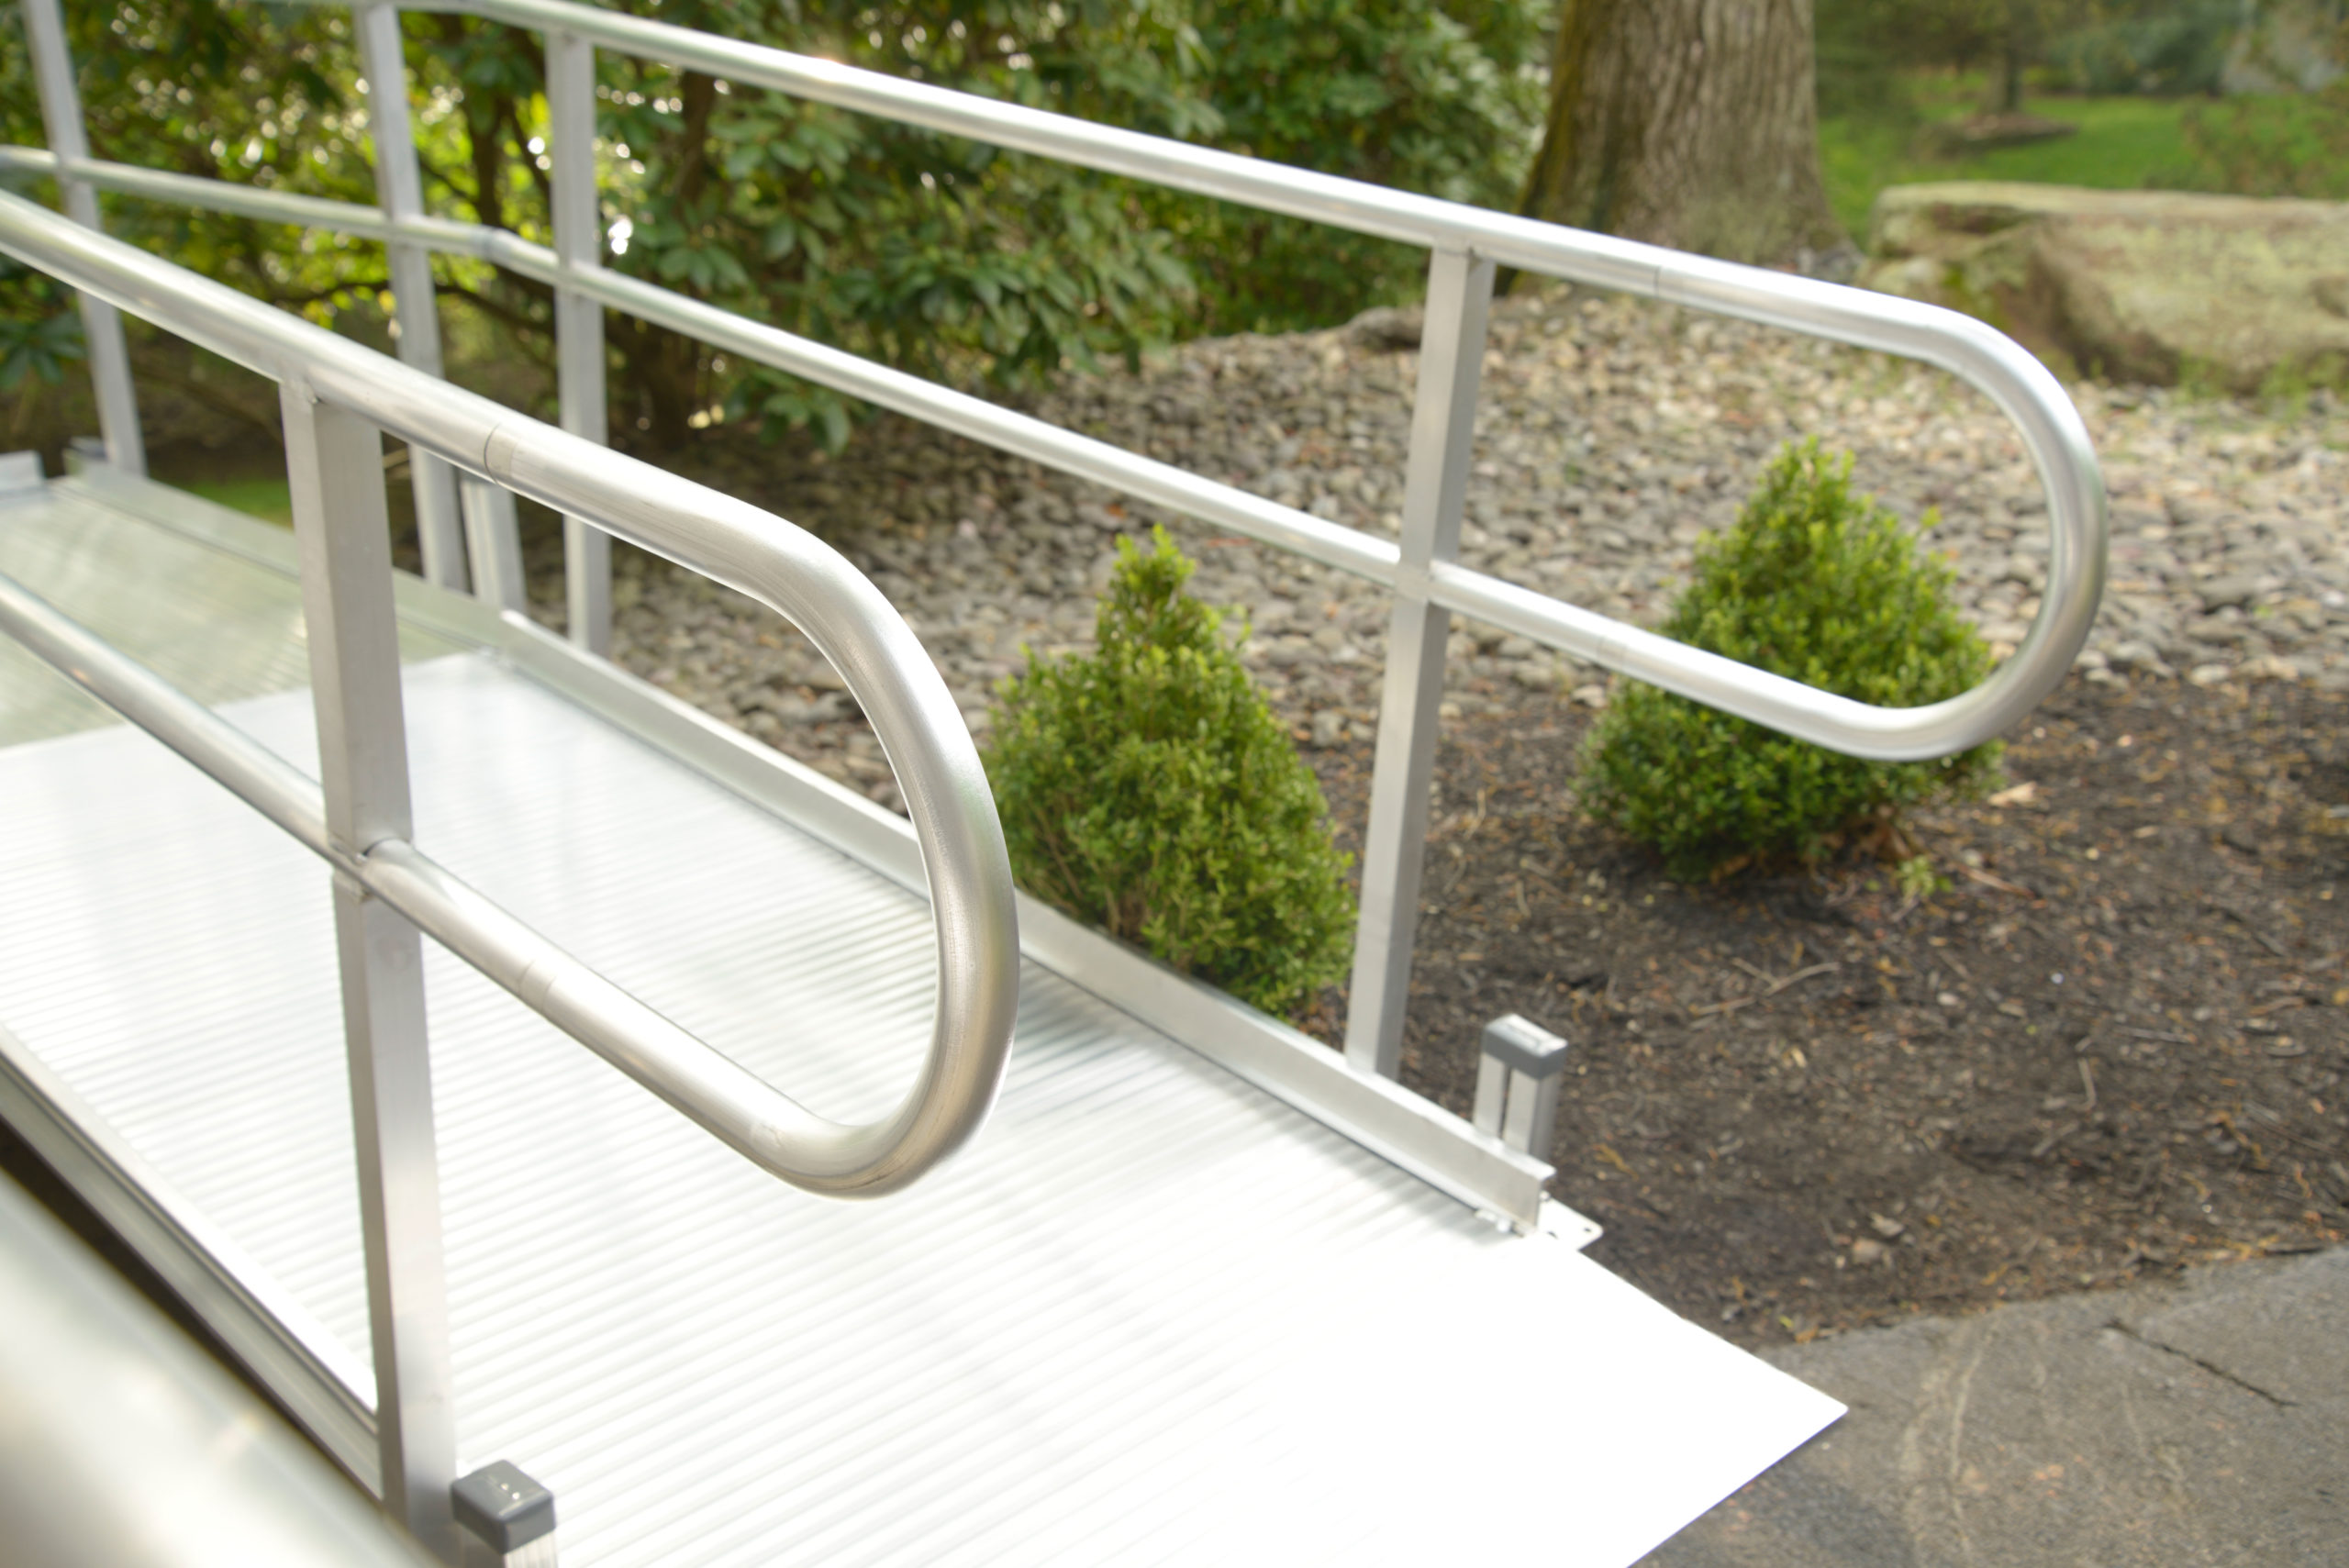 A metal ramp for wheelchair accessibility.